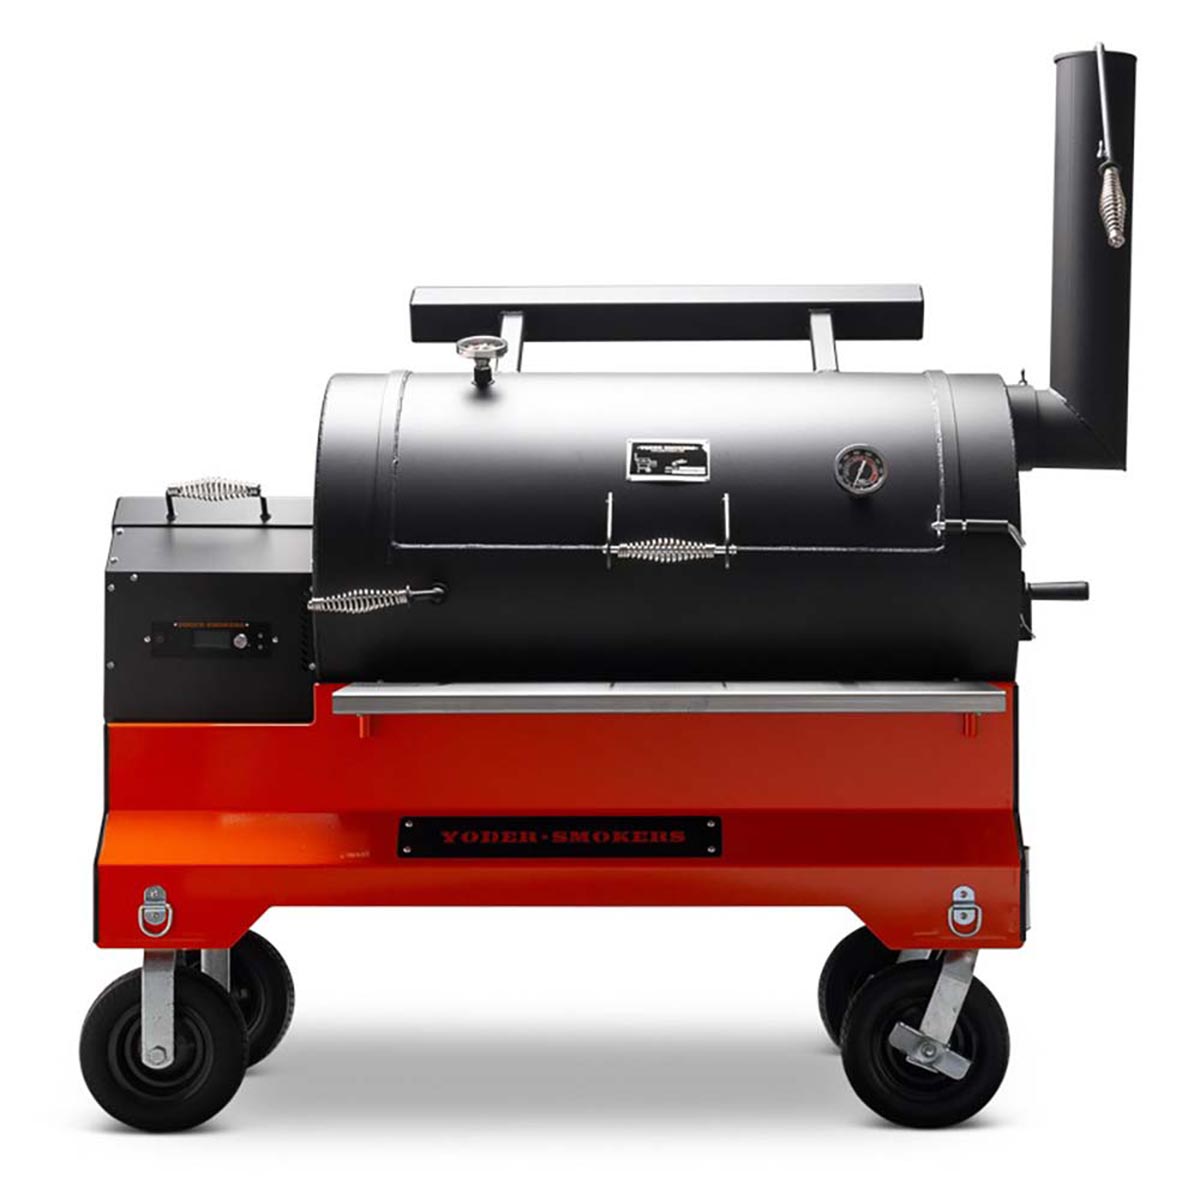 Yoder Smokers YS1500s Competition Pellet Grill (Orange Cart)